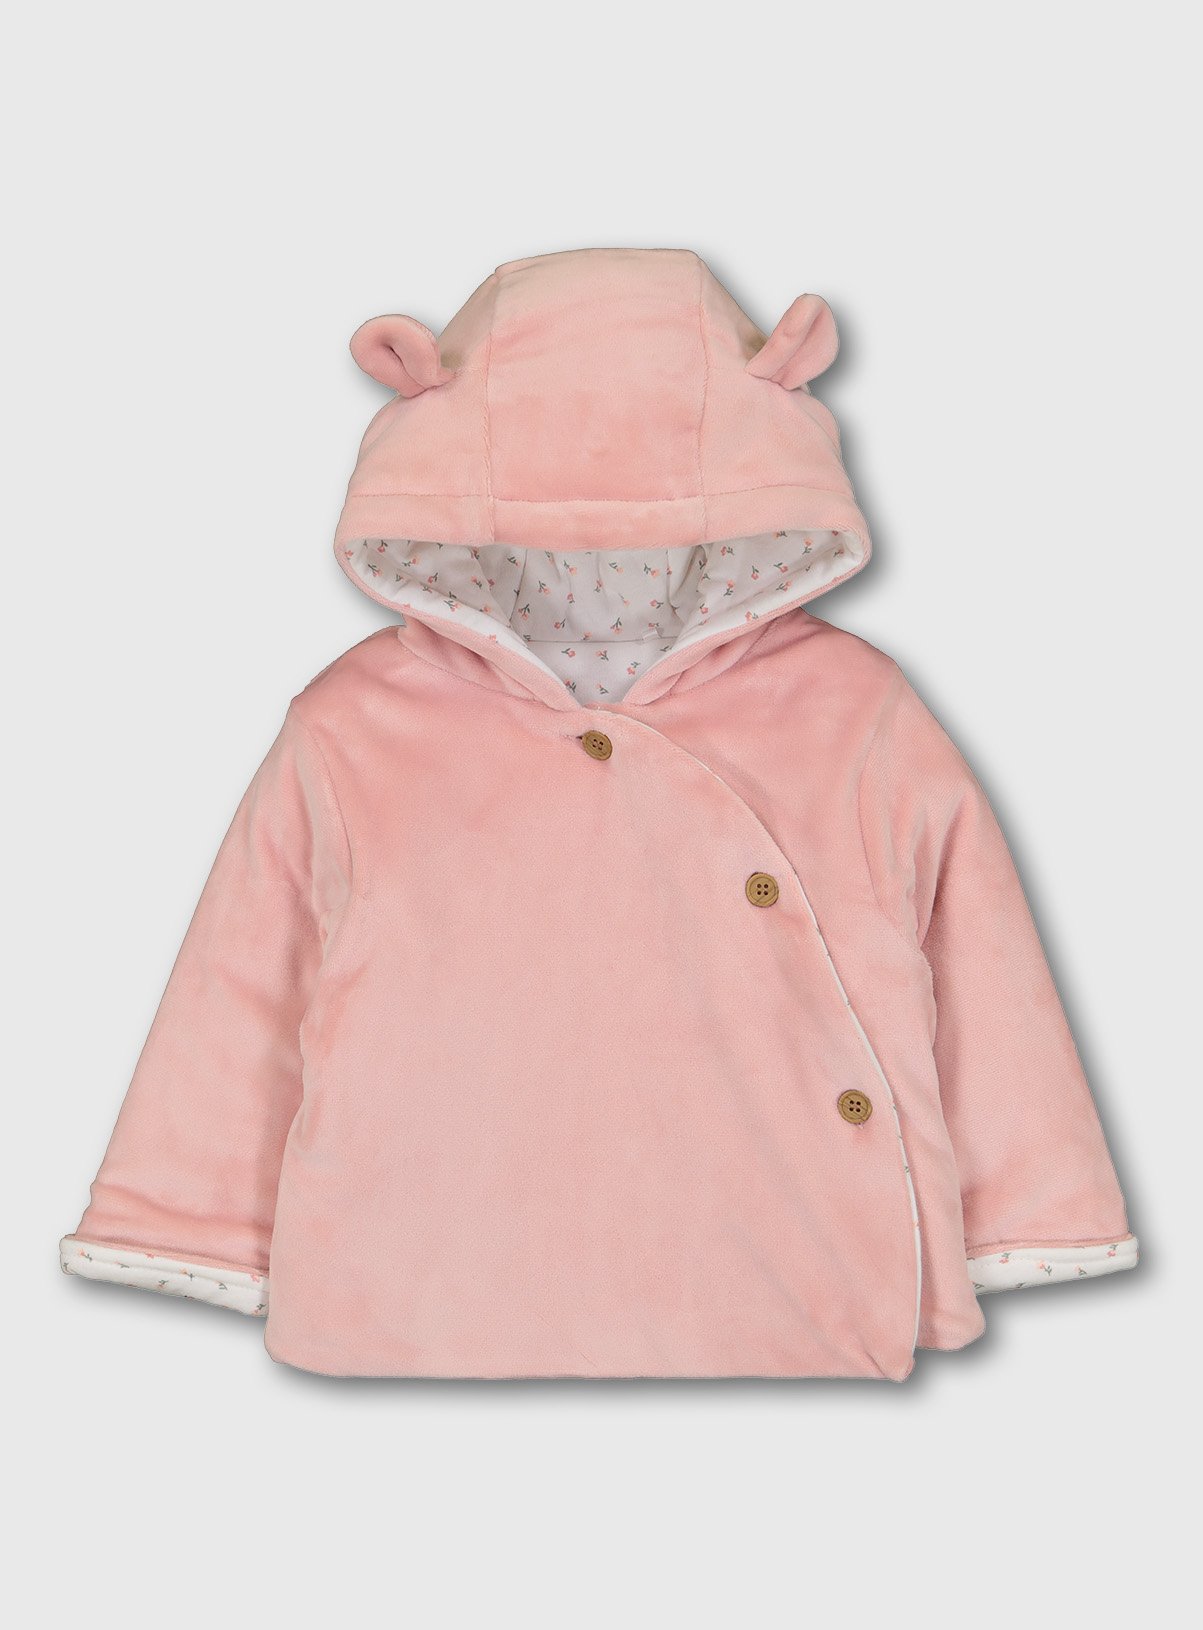 Baby Coats | Baby Snow Suits | Tu clothing